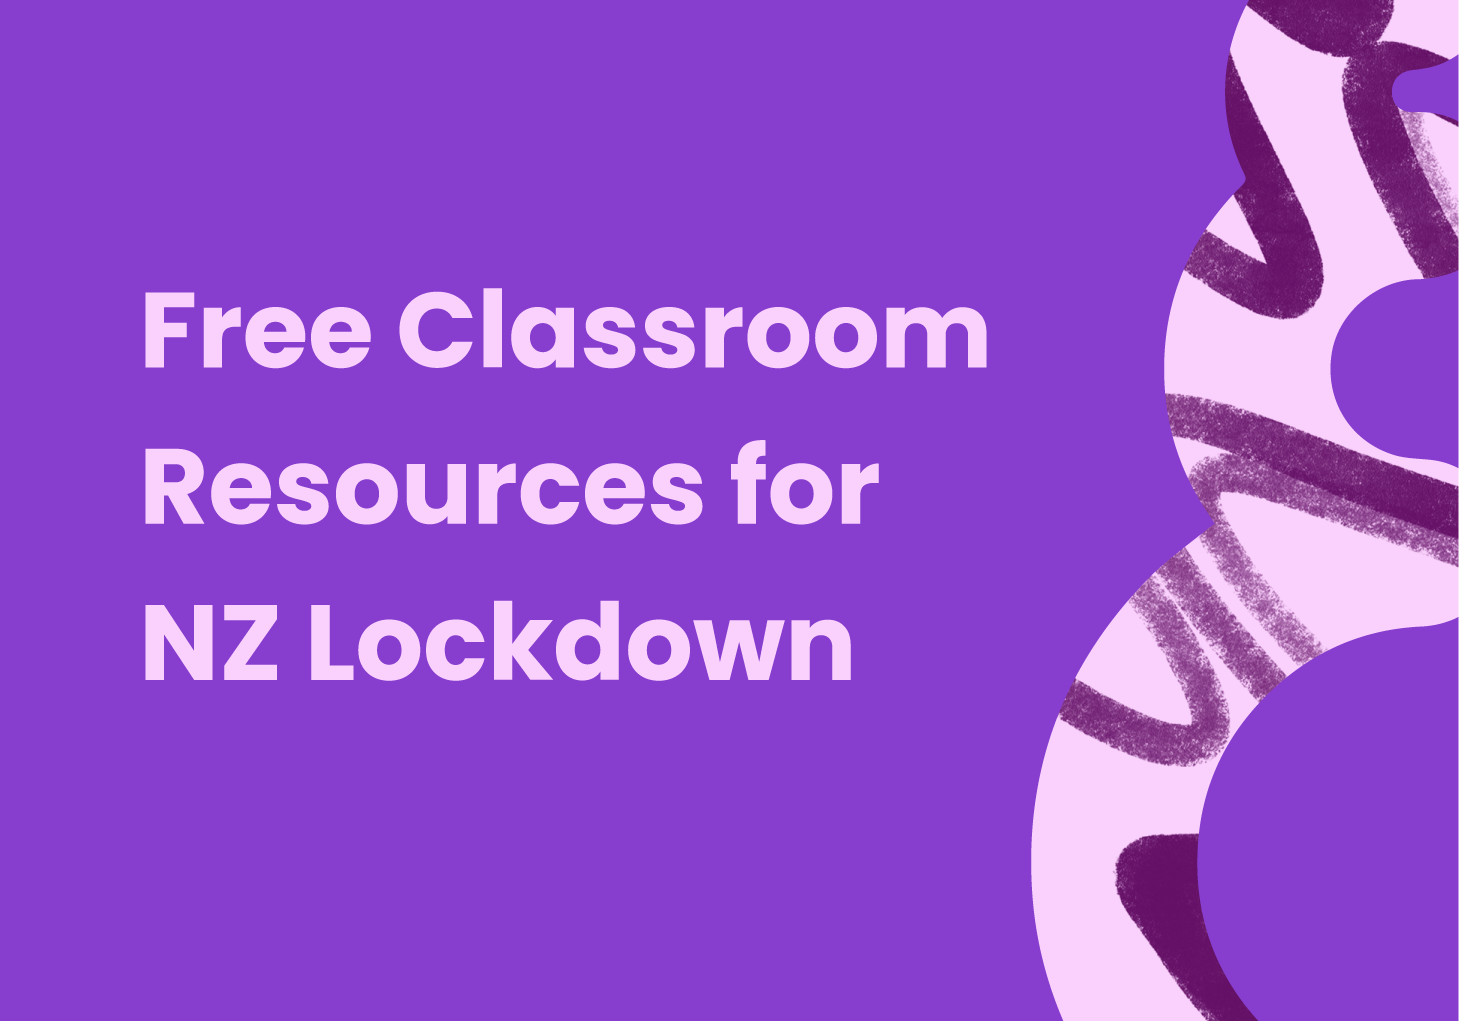 Free Classroom Resources for NZ Lockdown